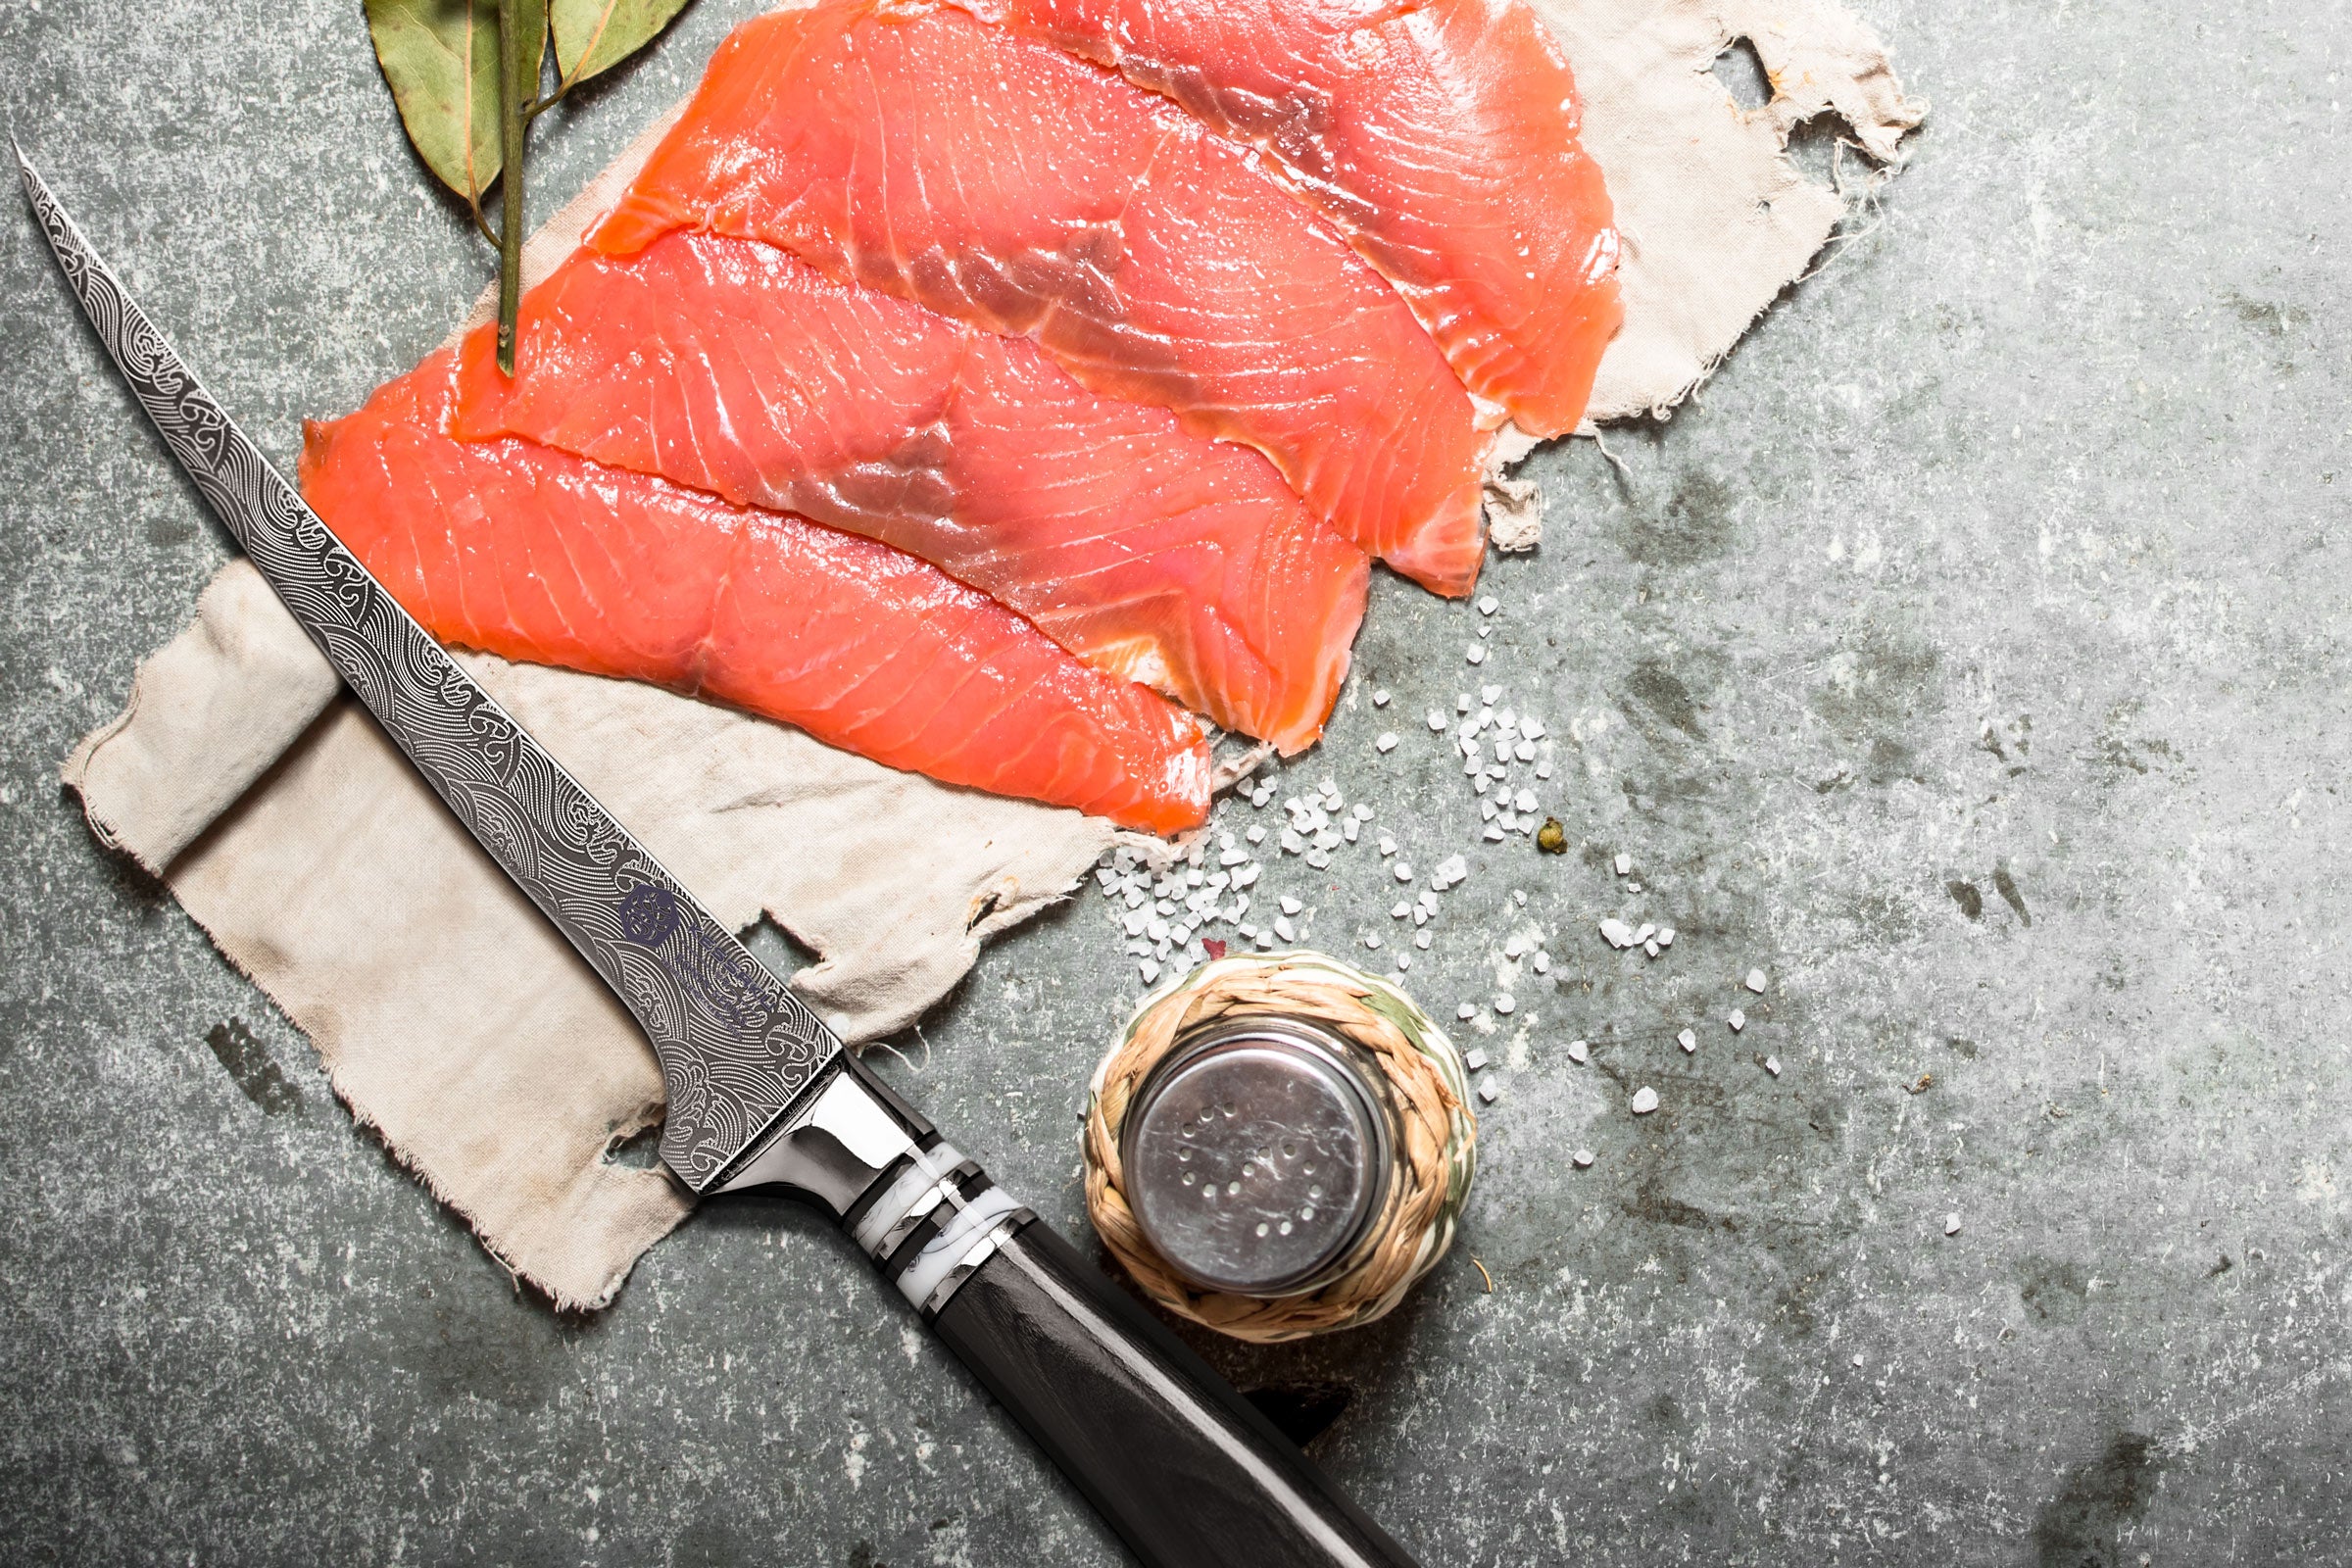 The Ronin FIllet knife with very thin slices of fish, and seasoning